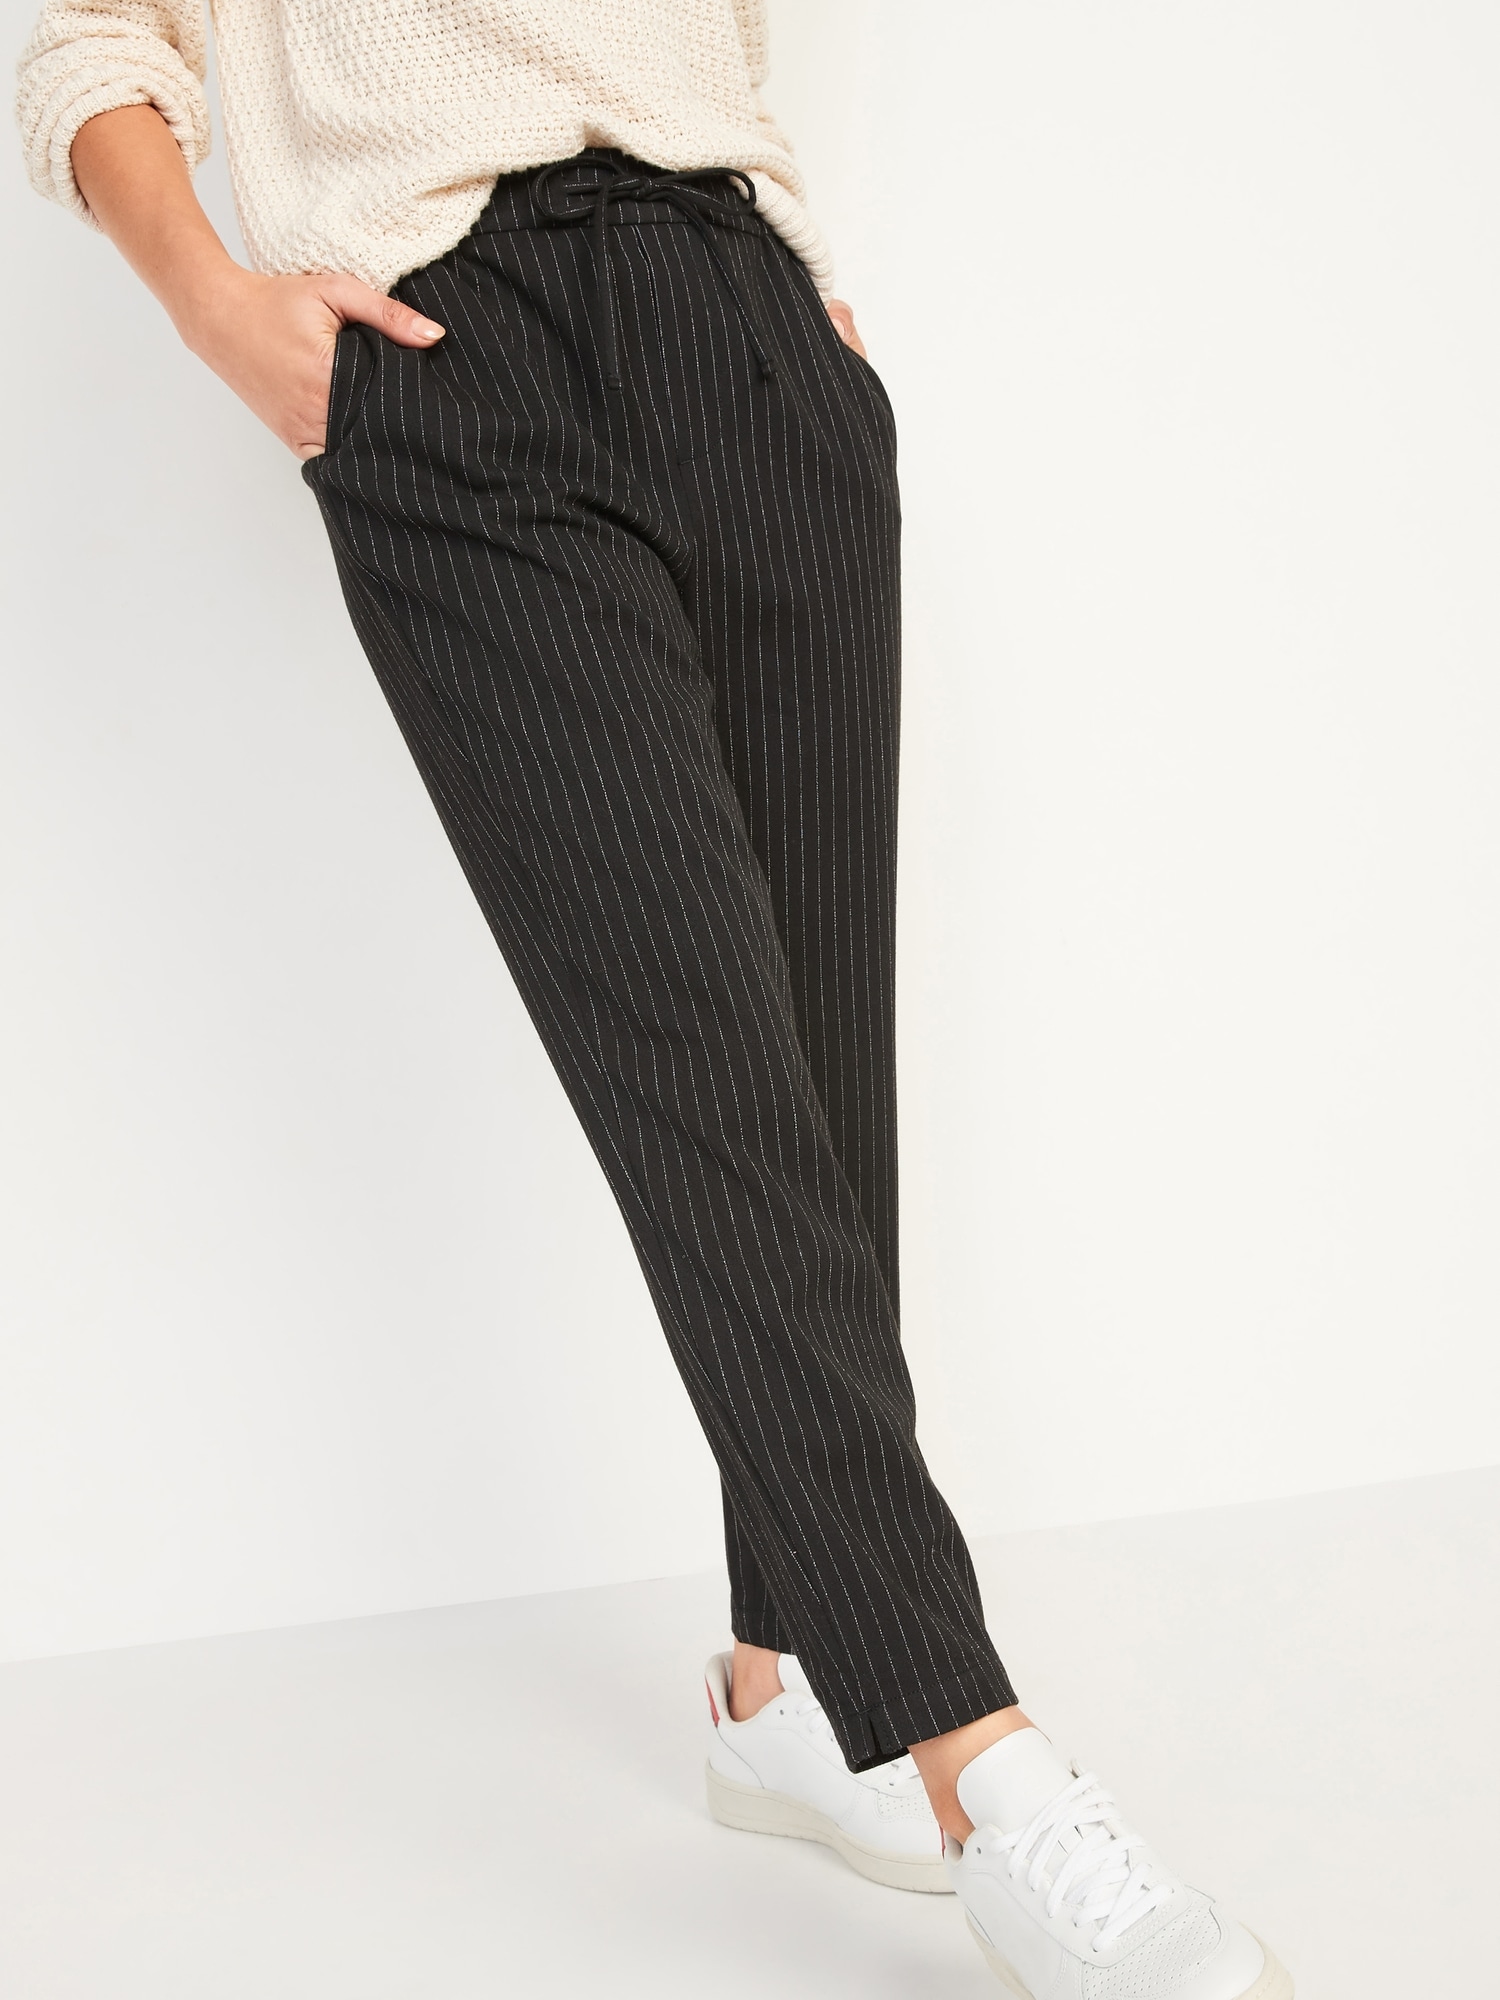 High-Waisted Soft-Brushed Pull-On Ankle Pants for Women | Old Navy